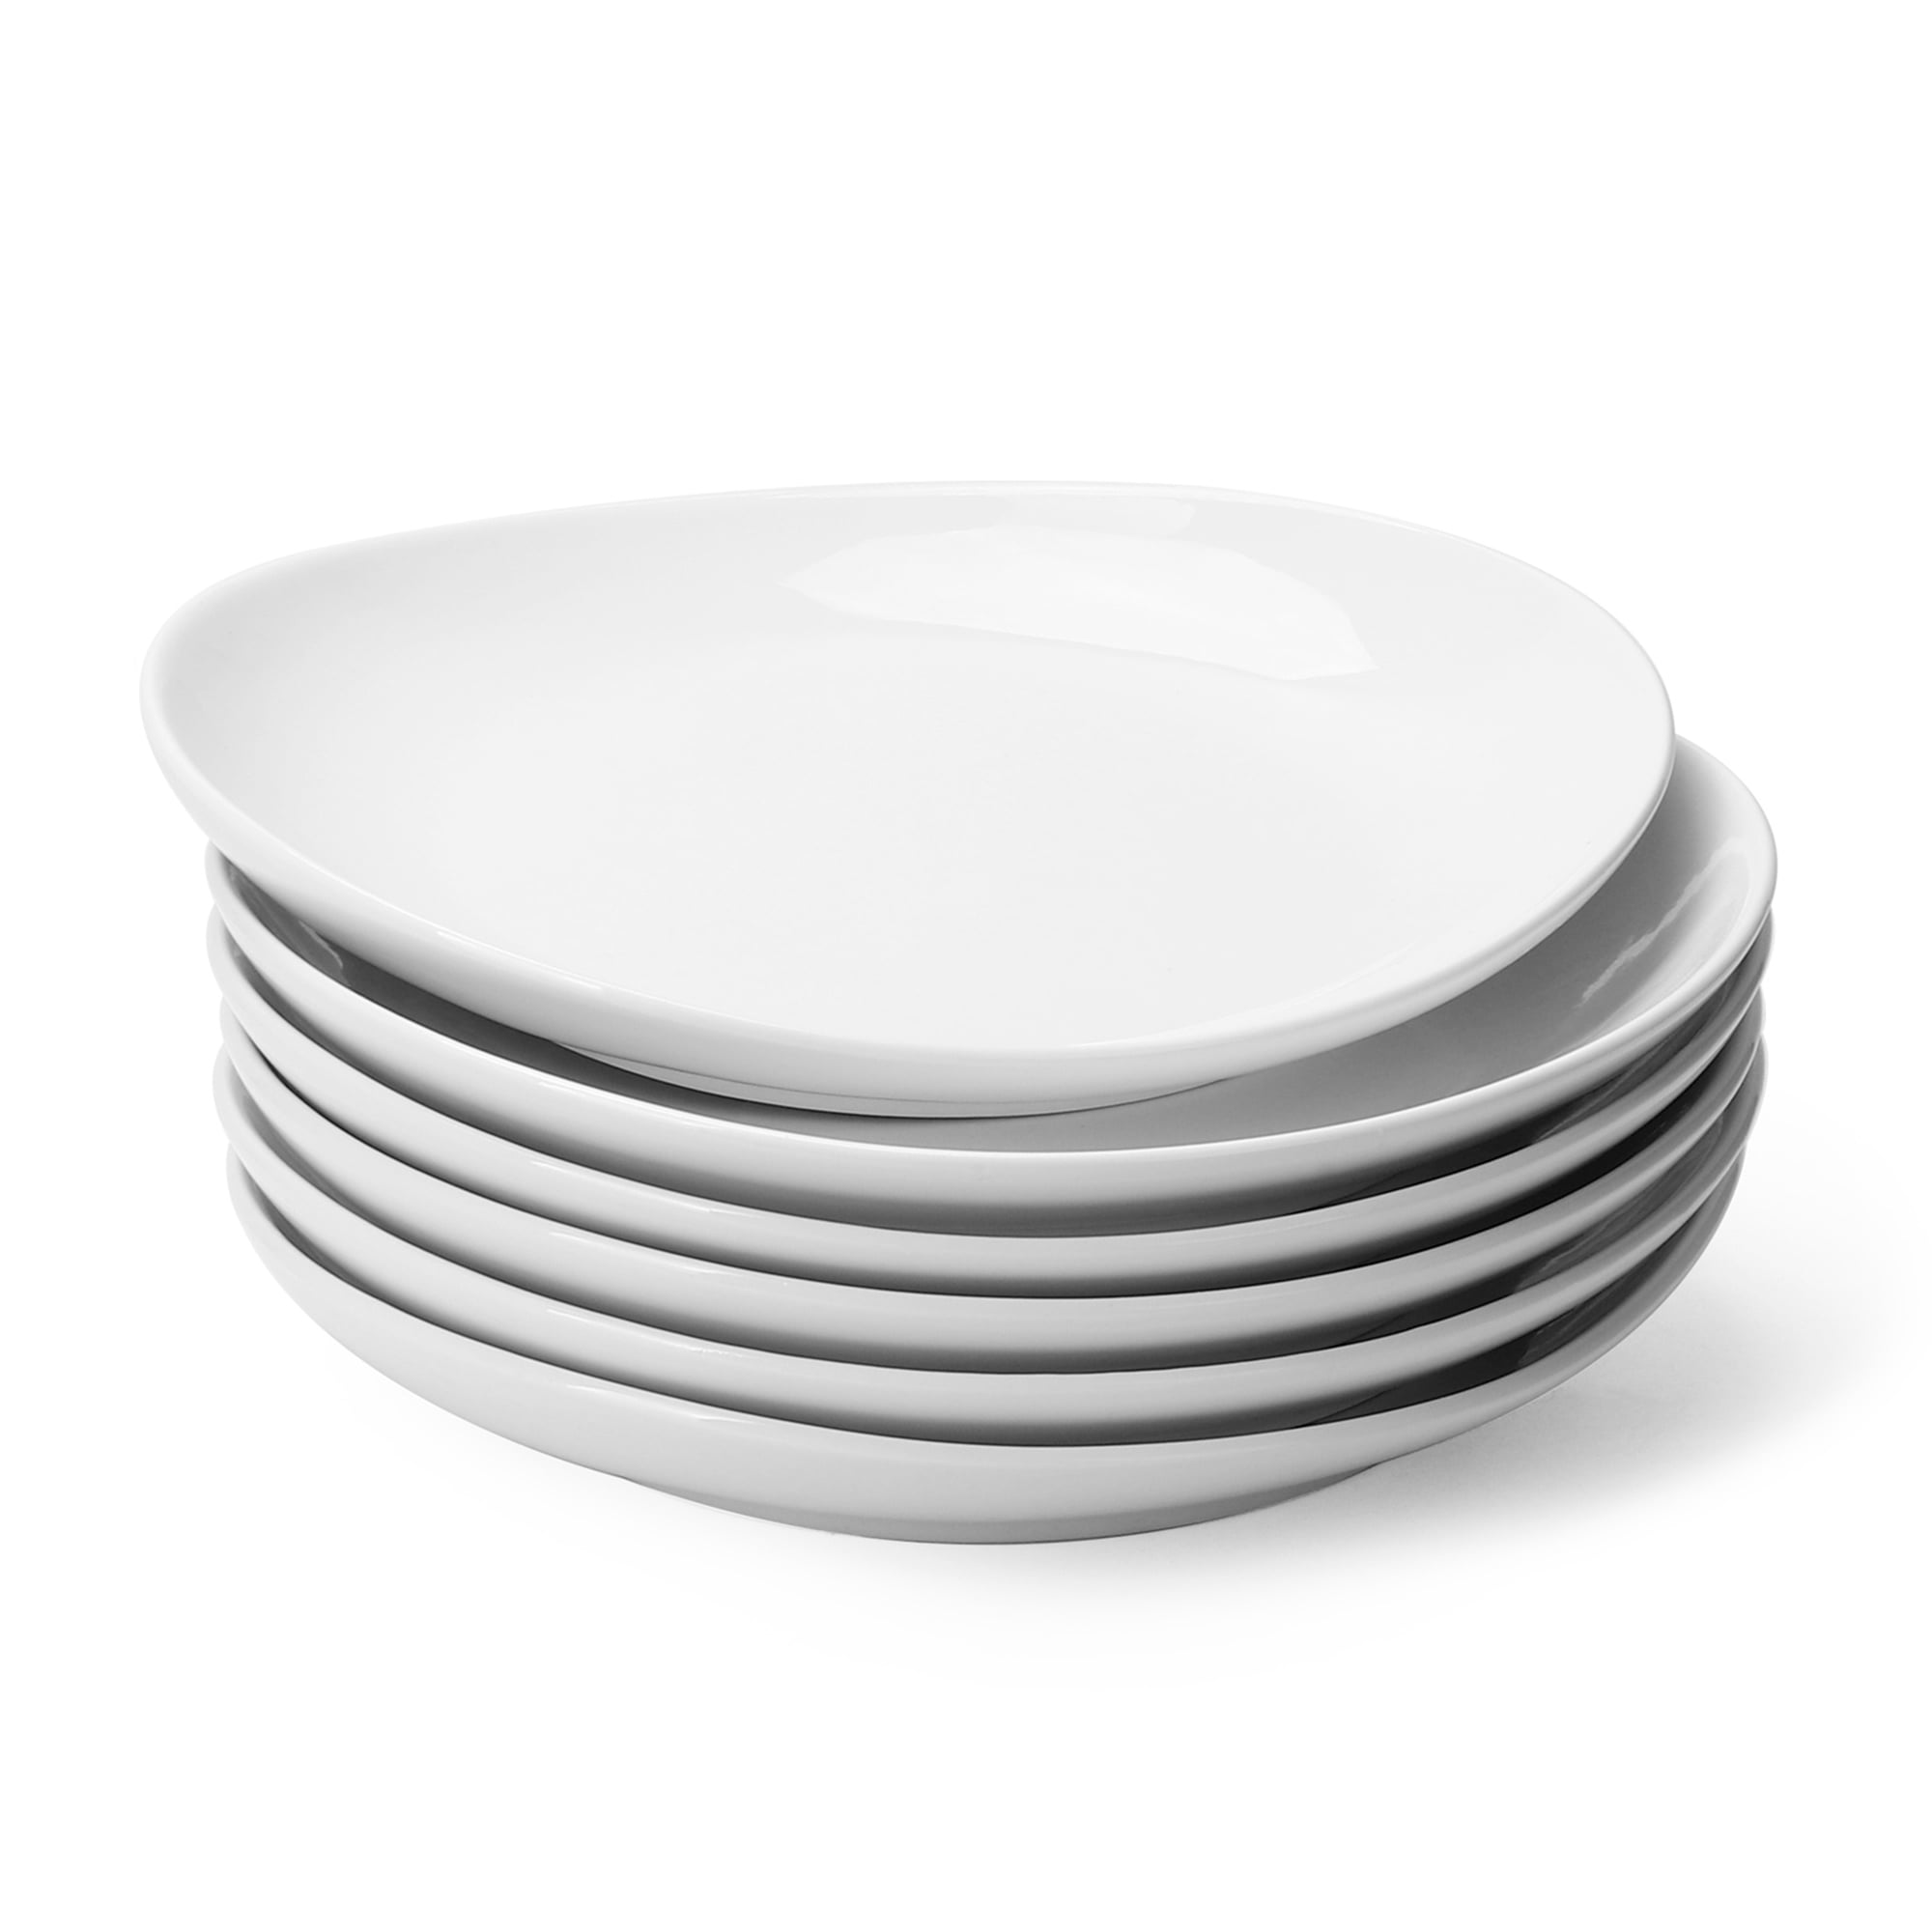 Pack of 6 Red Vanilla Everytime White Coupe 8.5-inch Salad Plates 